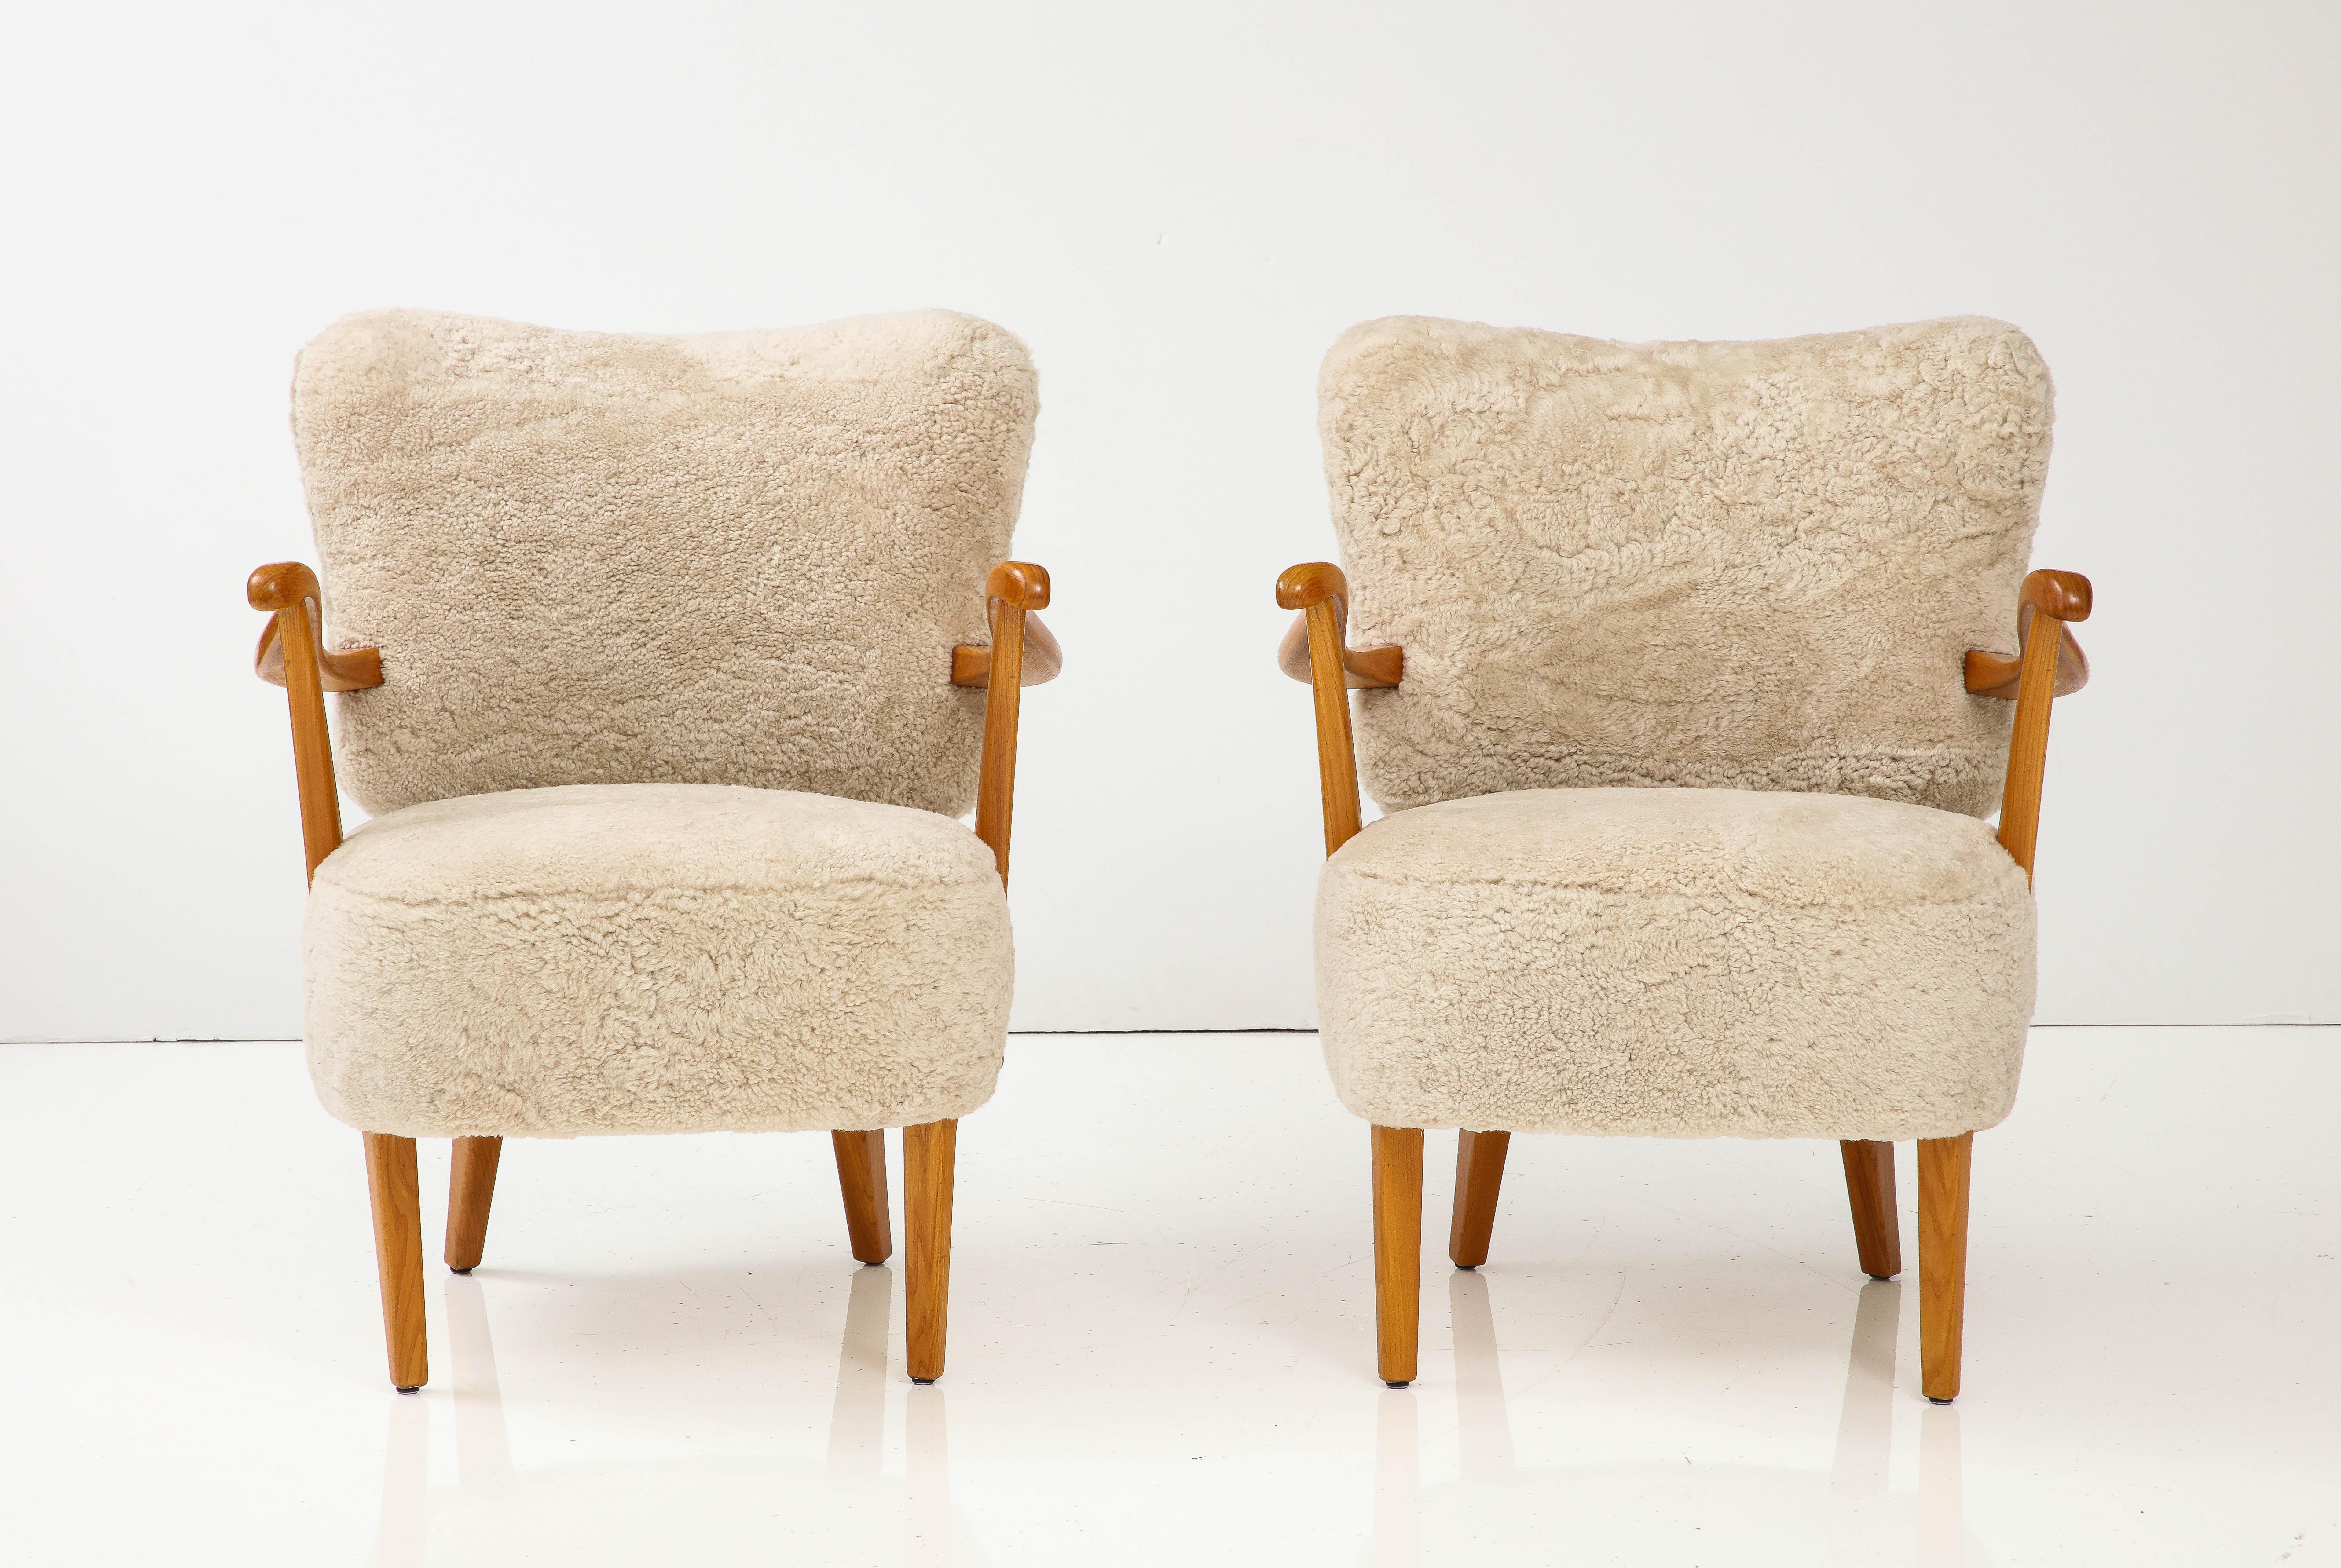 A pair of Swedish Modern elmwood open armchairs, Circa 1940s, with the curved sheepskin backs, scolded armrest above upholstered seats raised on tapered legs.